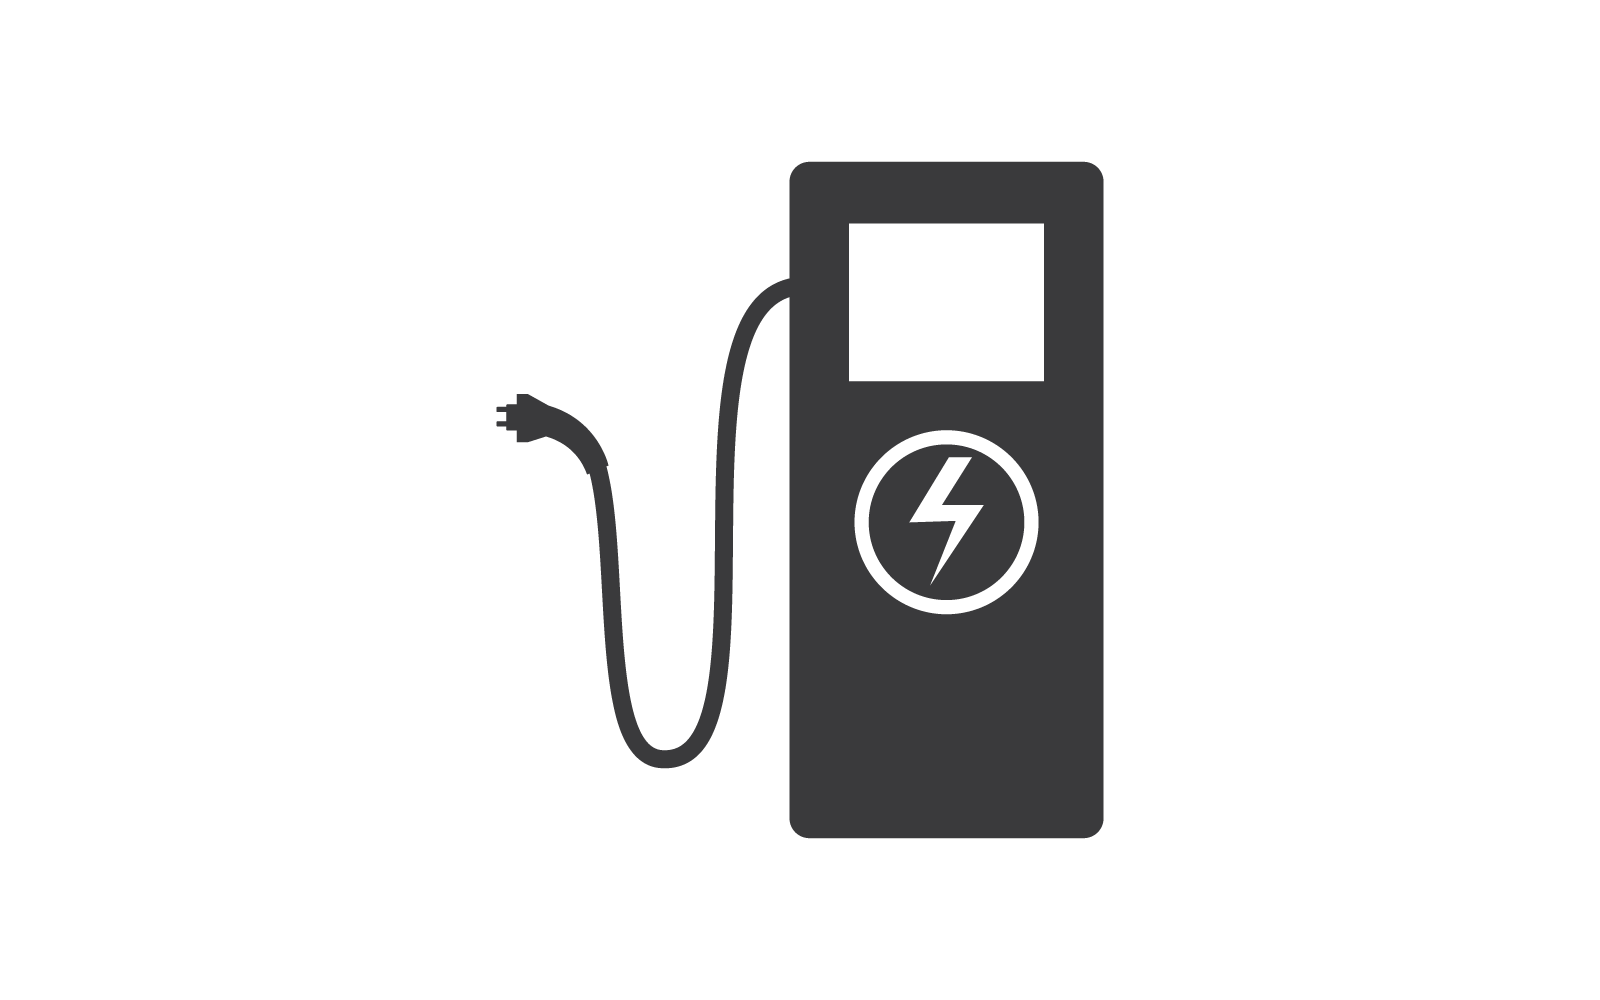 Electrical charging station icon vector flat design